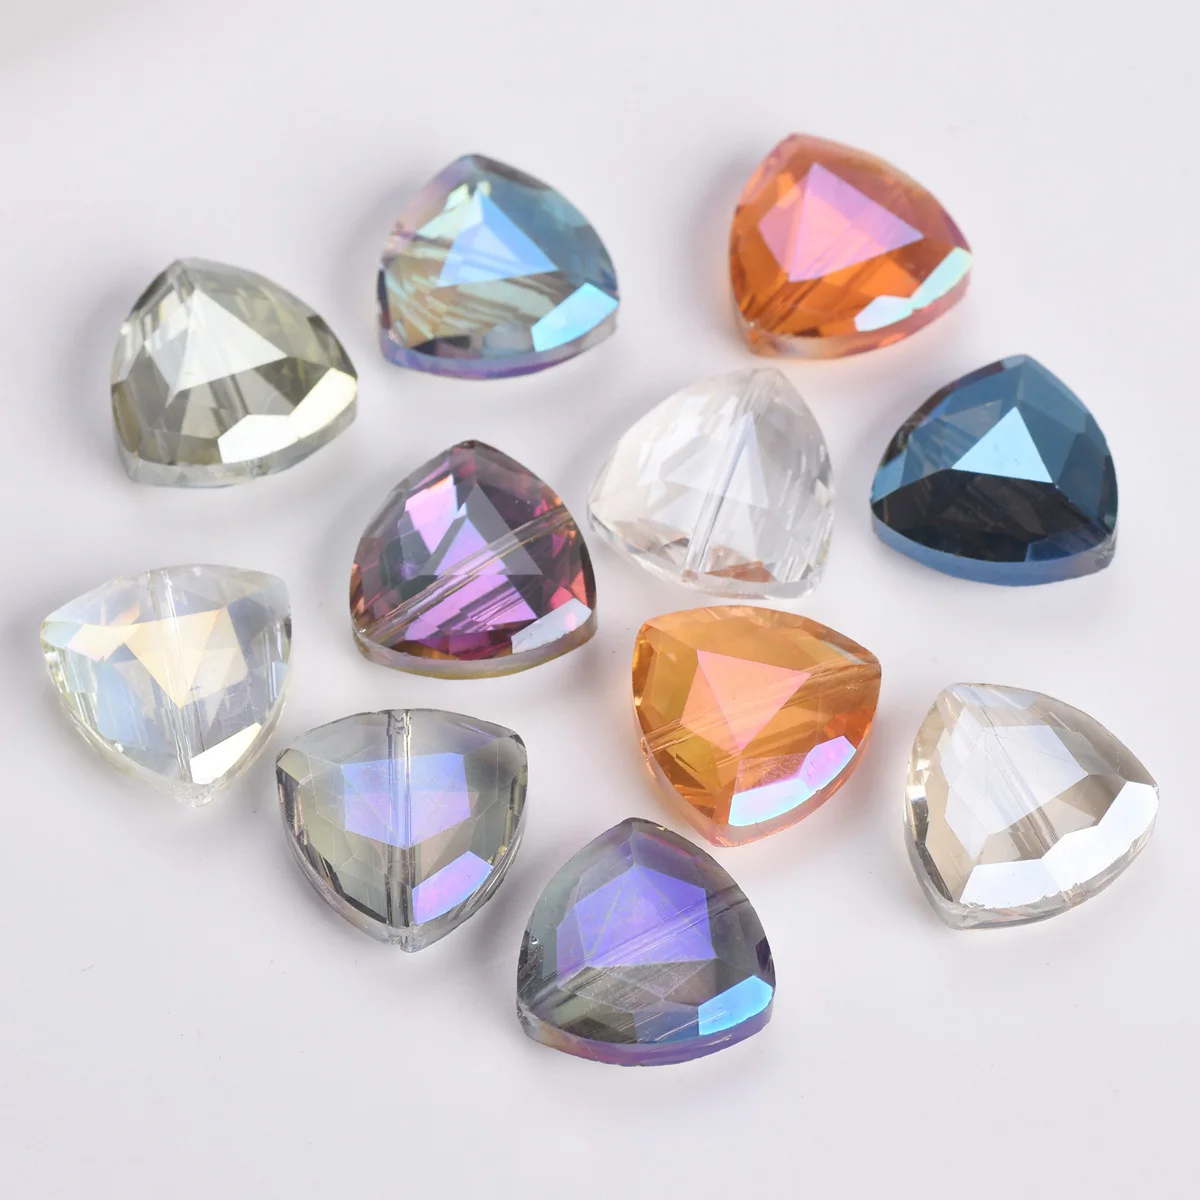 10pcs 18mm Colorful Triangle Faceted Crystal Glass Loose Beads for Jewelry Making DIY Crafts Findings 5pcs transparent 27mm austrian element peach heart pendant sun catcher crystal chandelier decor faceted glass prism love beads